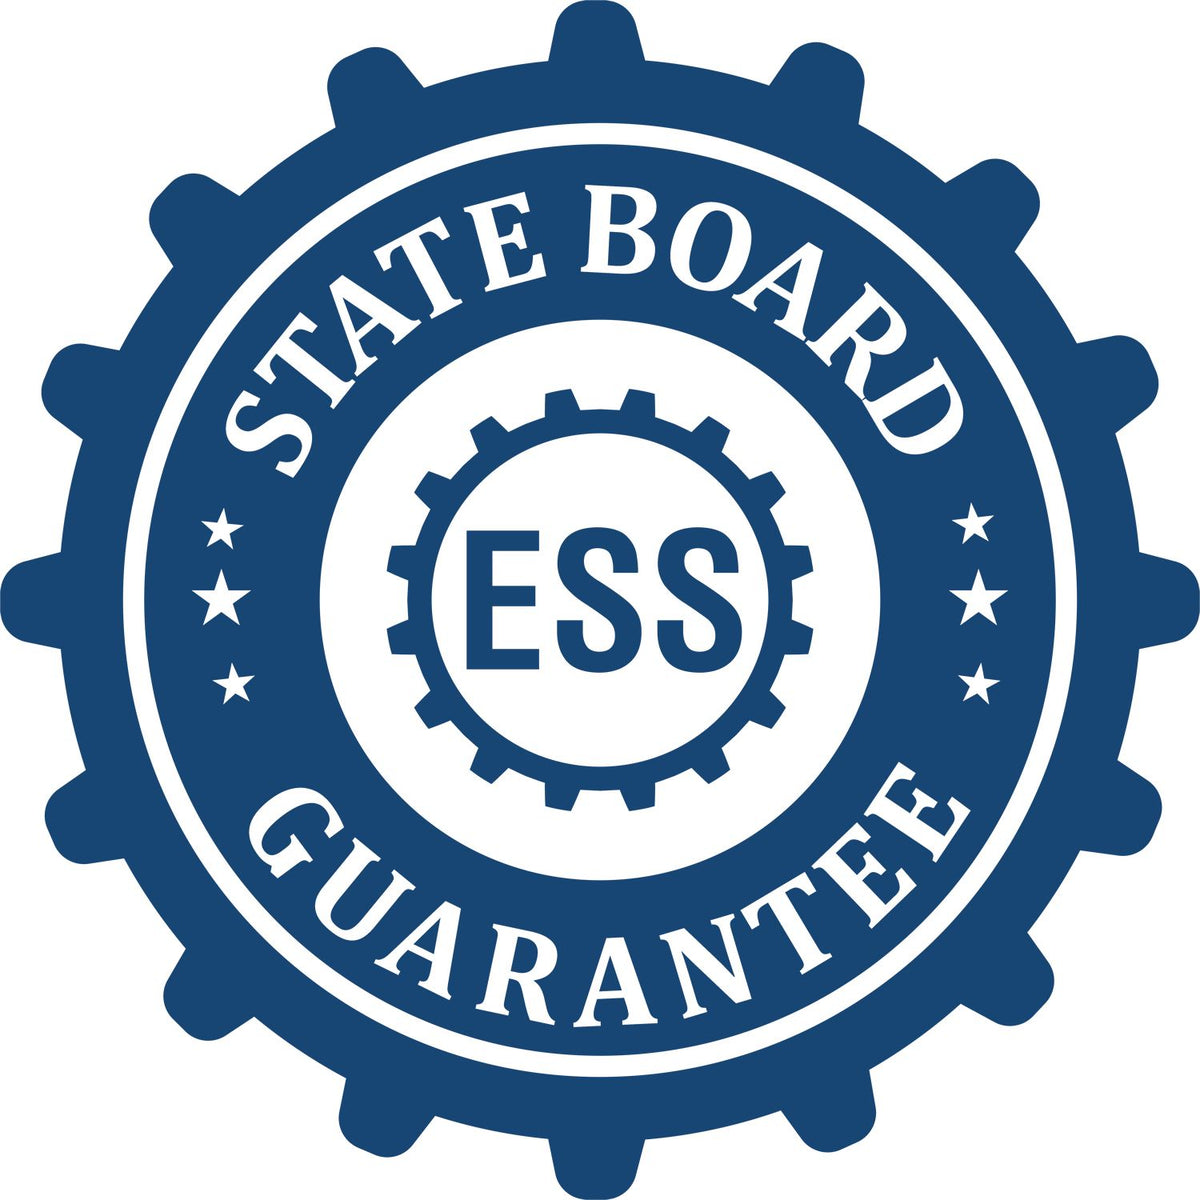 An emblem in a gear shape illustrating a state board guarantee for the State of Florida Extended Long Reach Geologist Seal